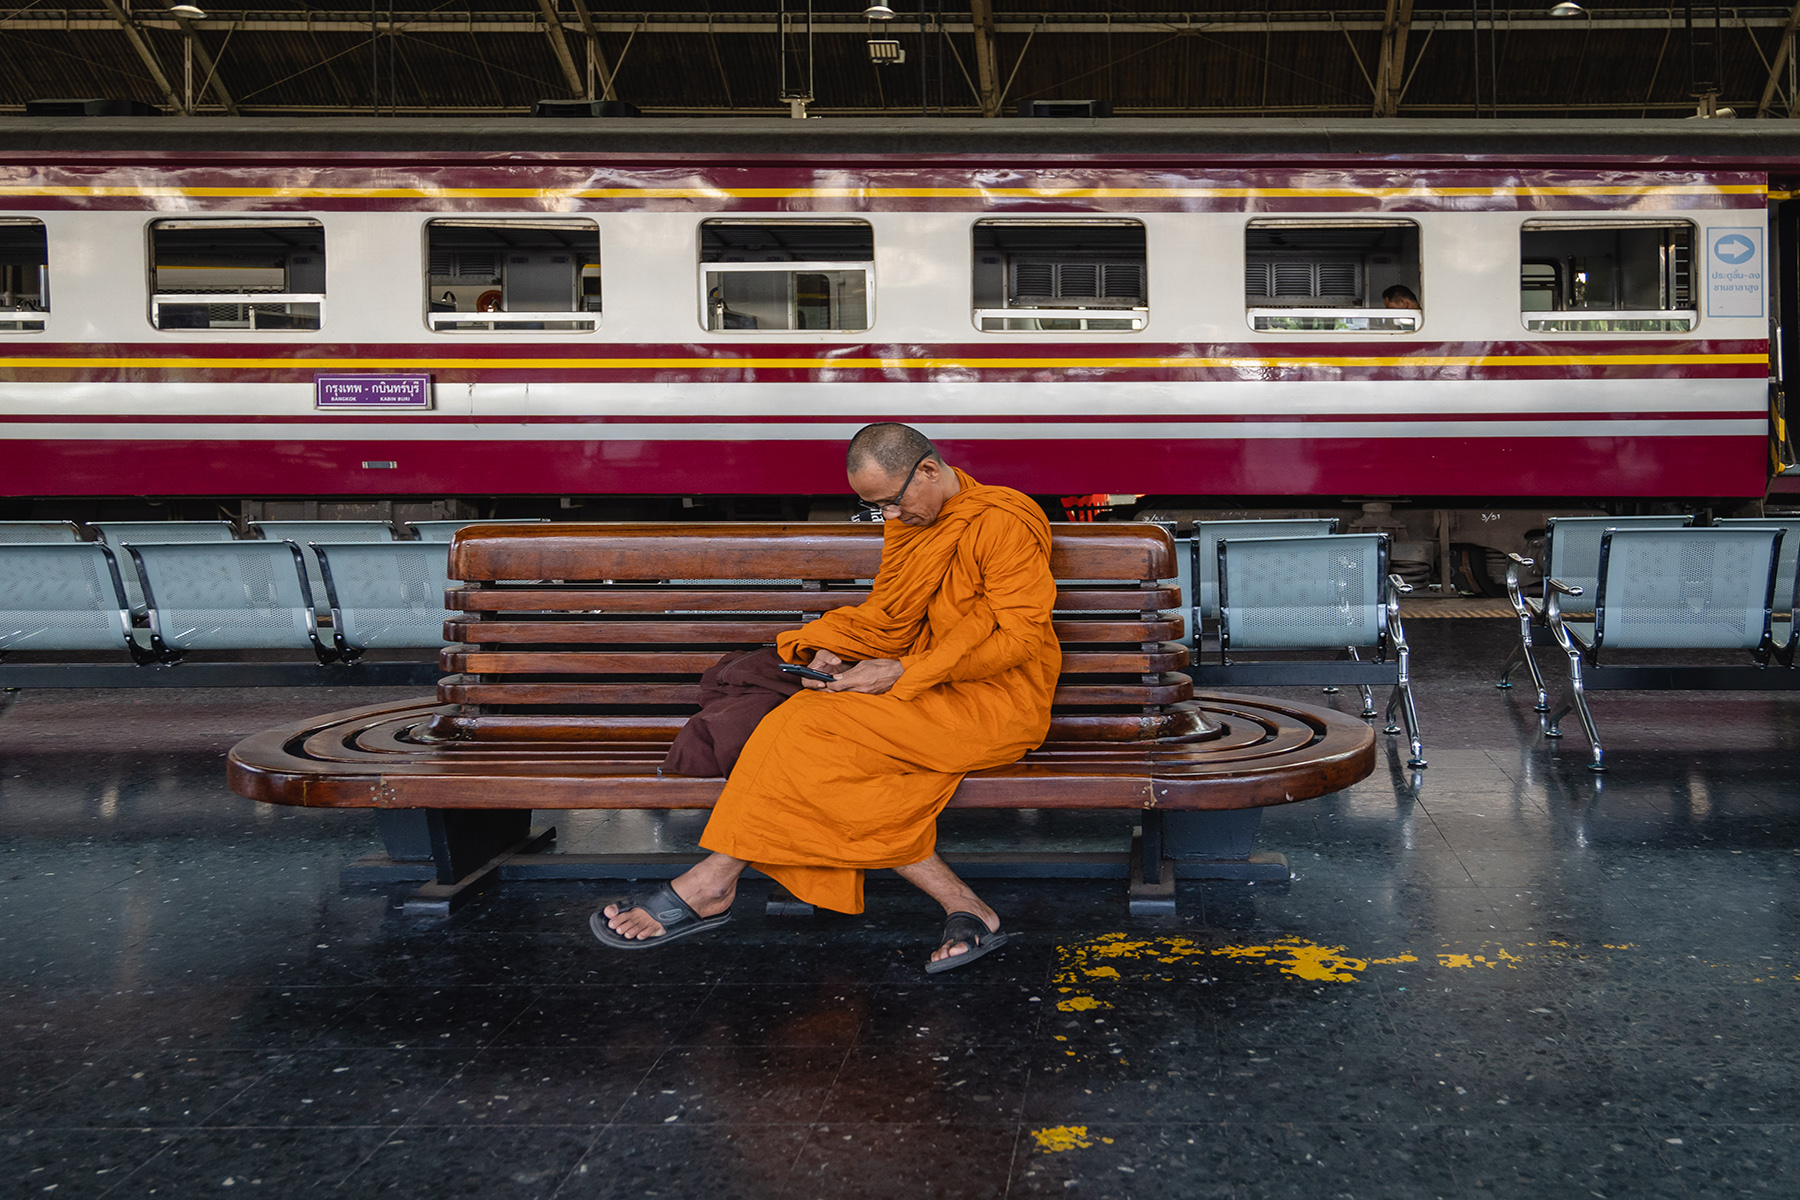 A Thai monk in orange robes sits at Hua Lamphong Station the train station and looks at his mobile phone